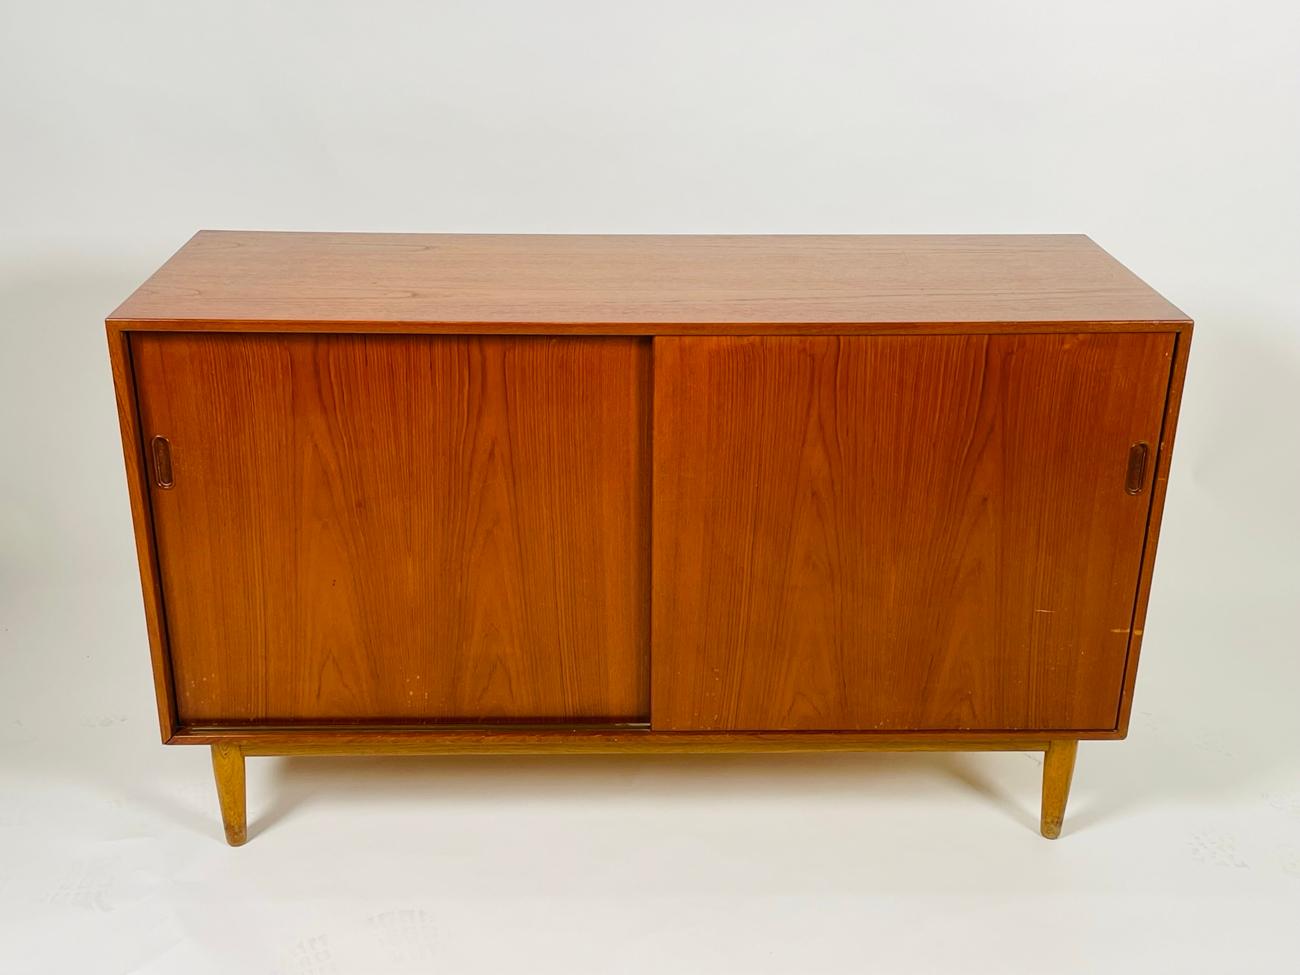 Beautiful cabinet made of teak. The cabinet has two sliding doors opening up to reveal 3 drawers on one side and 3 small drawers on the opposite side along with a shelf and two small cubbies.

The cabinet has a low profile, clean lines and would